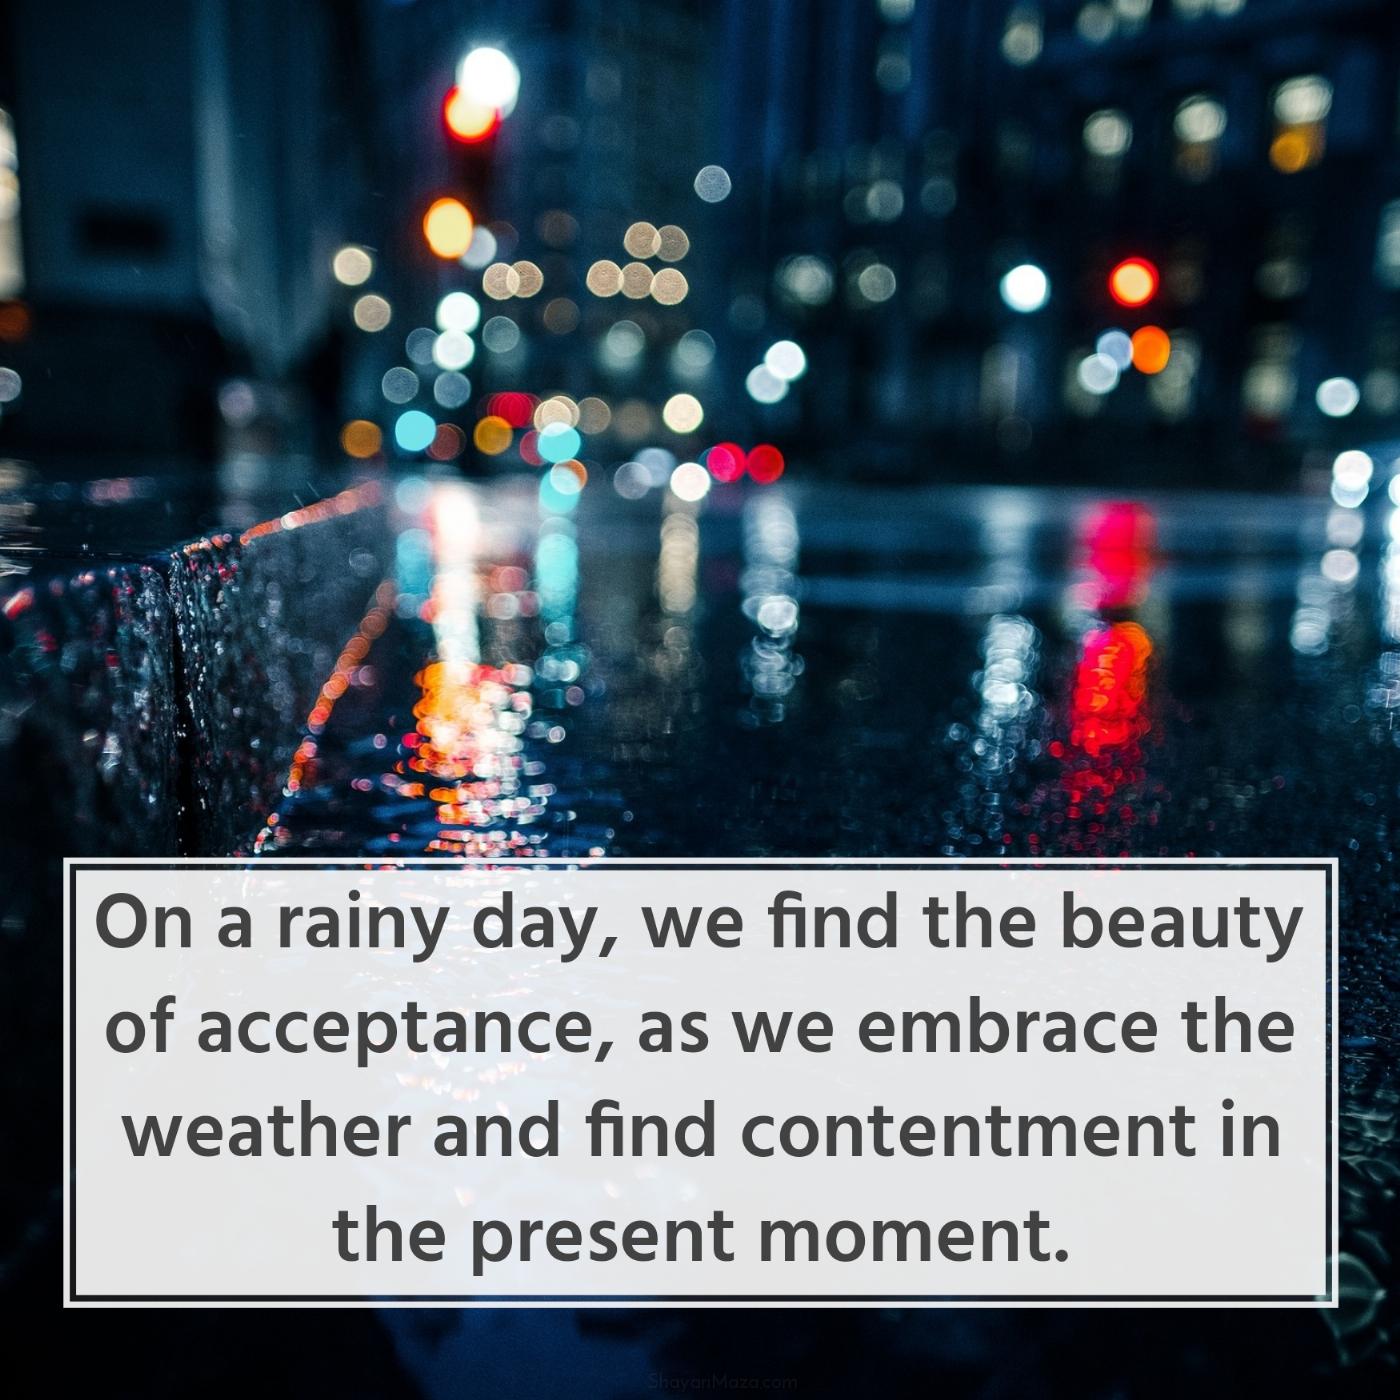 On a rainy day we find the beauty of acceptance